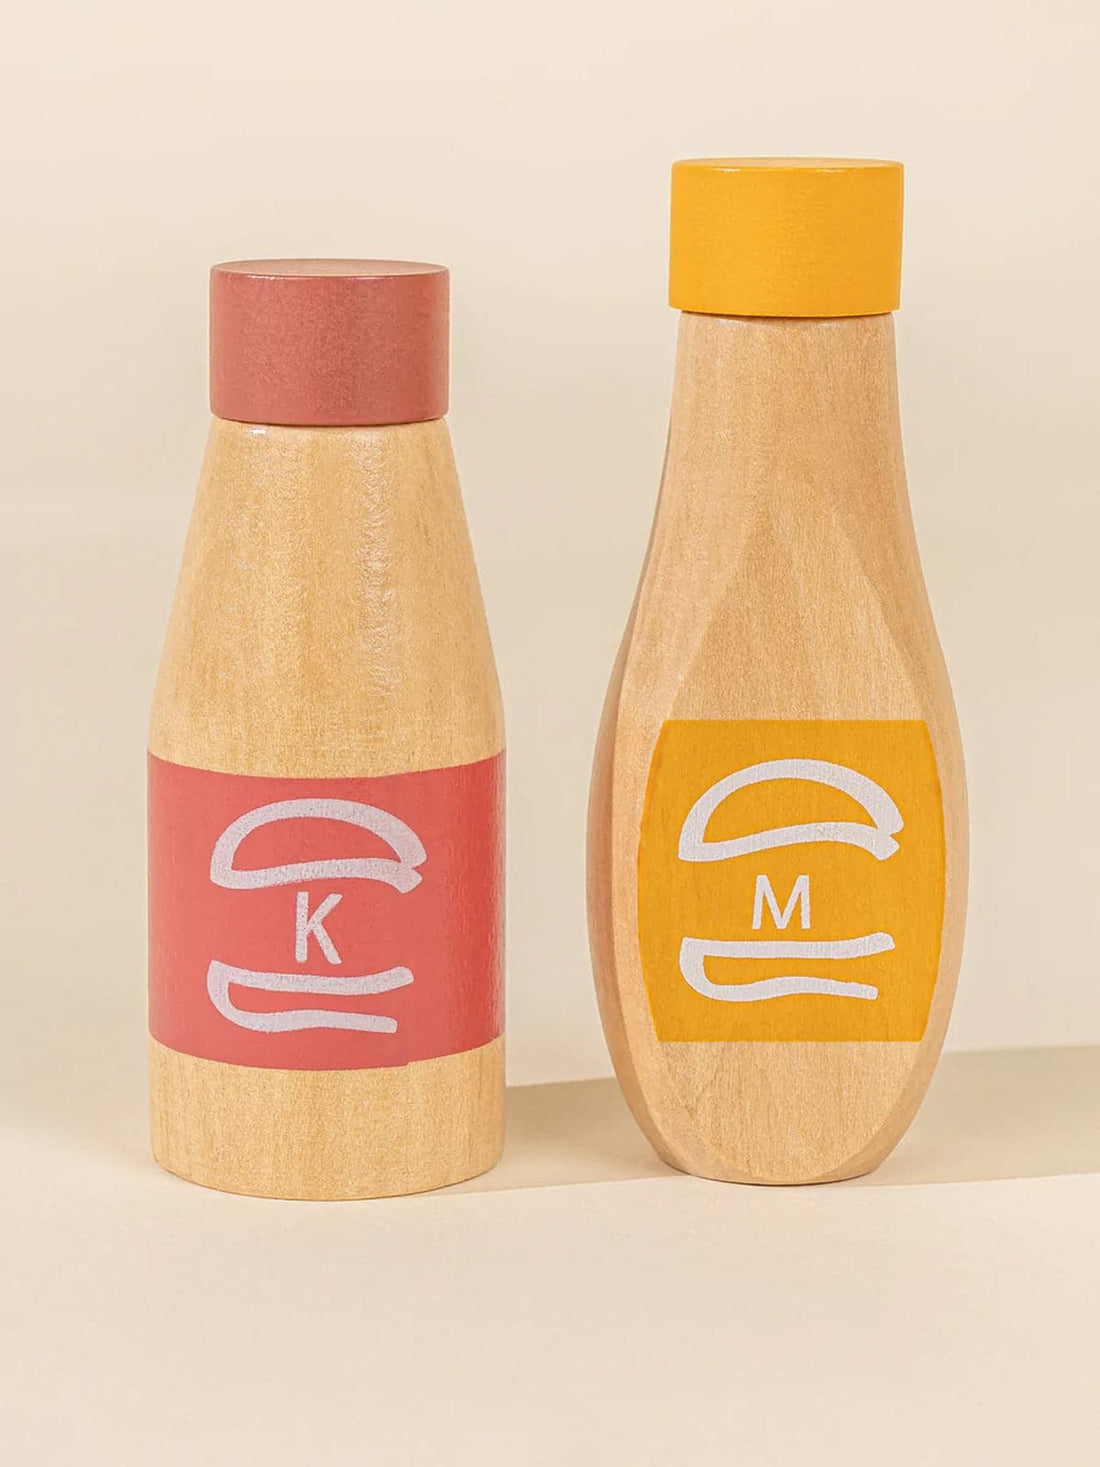 WOODEN GROCERY PLAYSET - CONDIMENTS